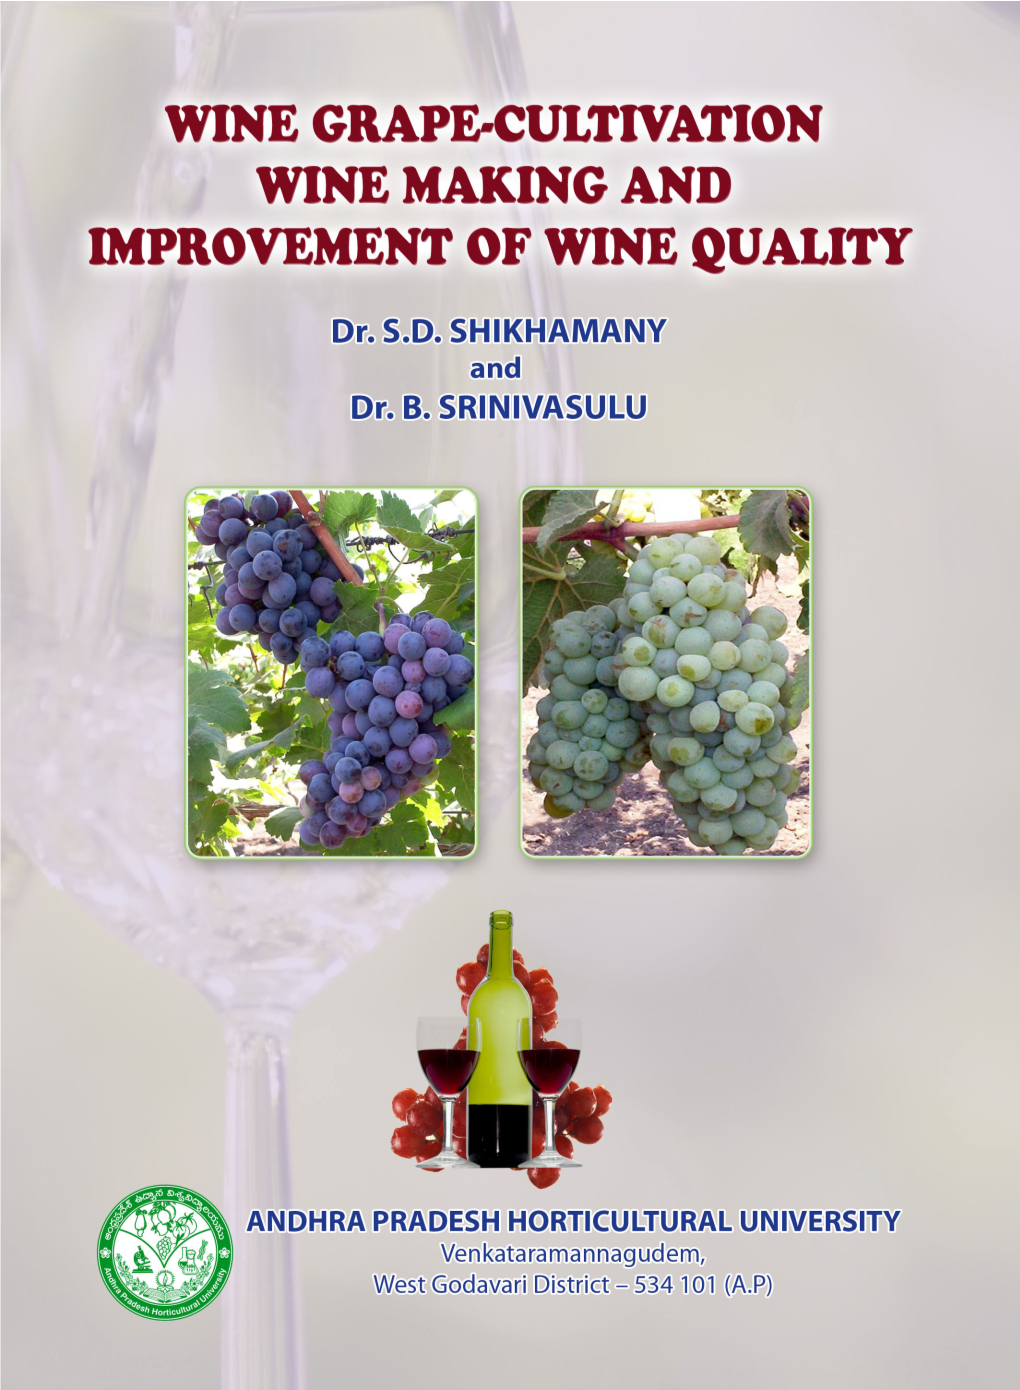 Wine Grape-Cultivation Wine Making and Improvement of Wine Quality